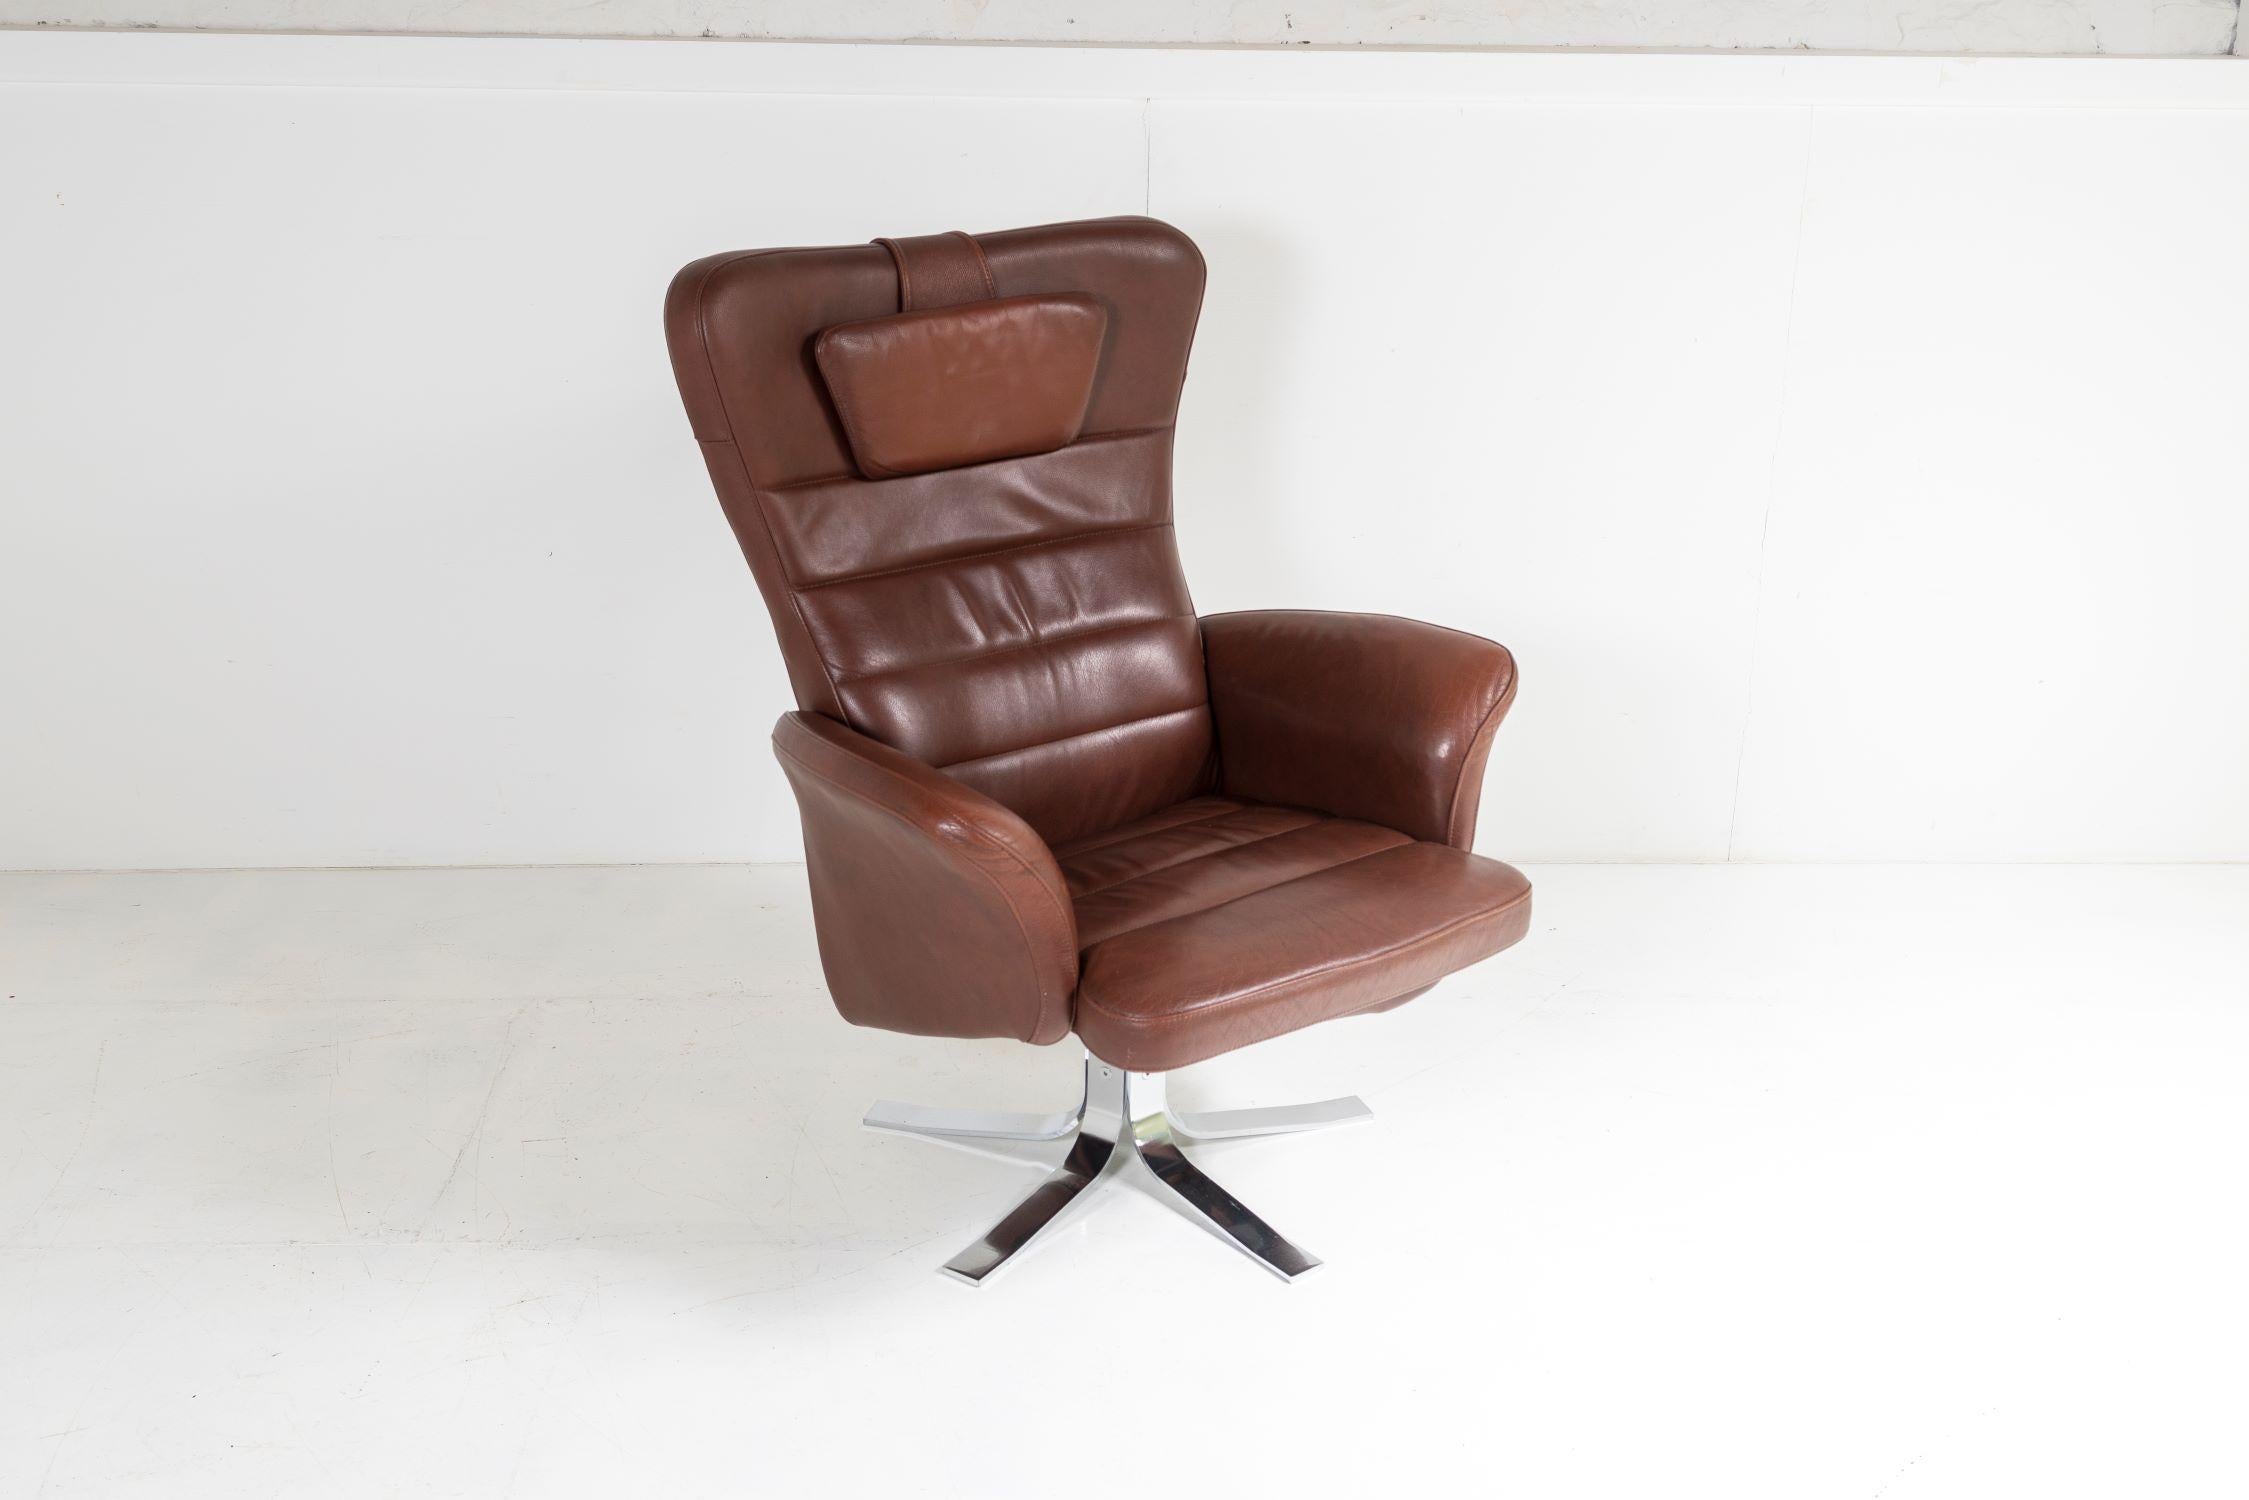 A stylish mid century brown leather Swivel chair on heavy chrome base. A large chair with good proportion, egg shaped in design with sweeping curved arms, attractive design from the back too with a seem running up the centre. Includes a small loose